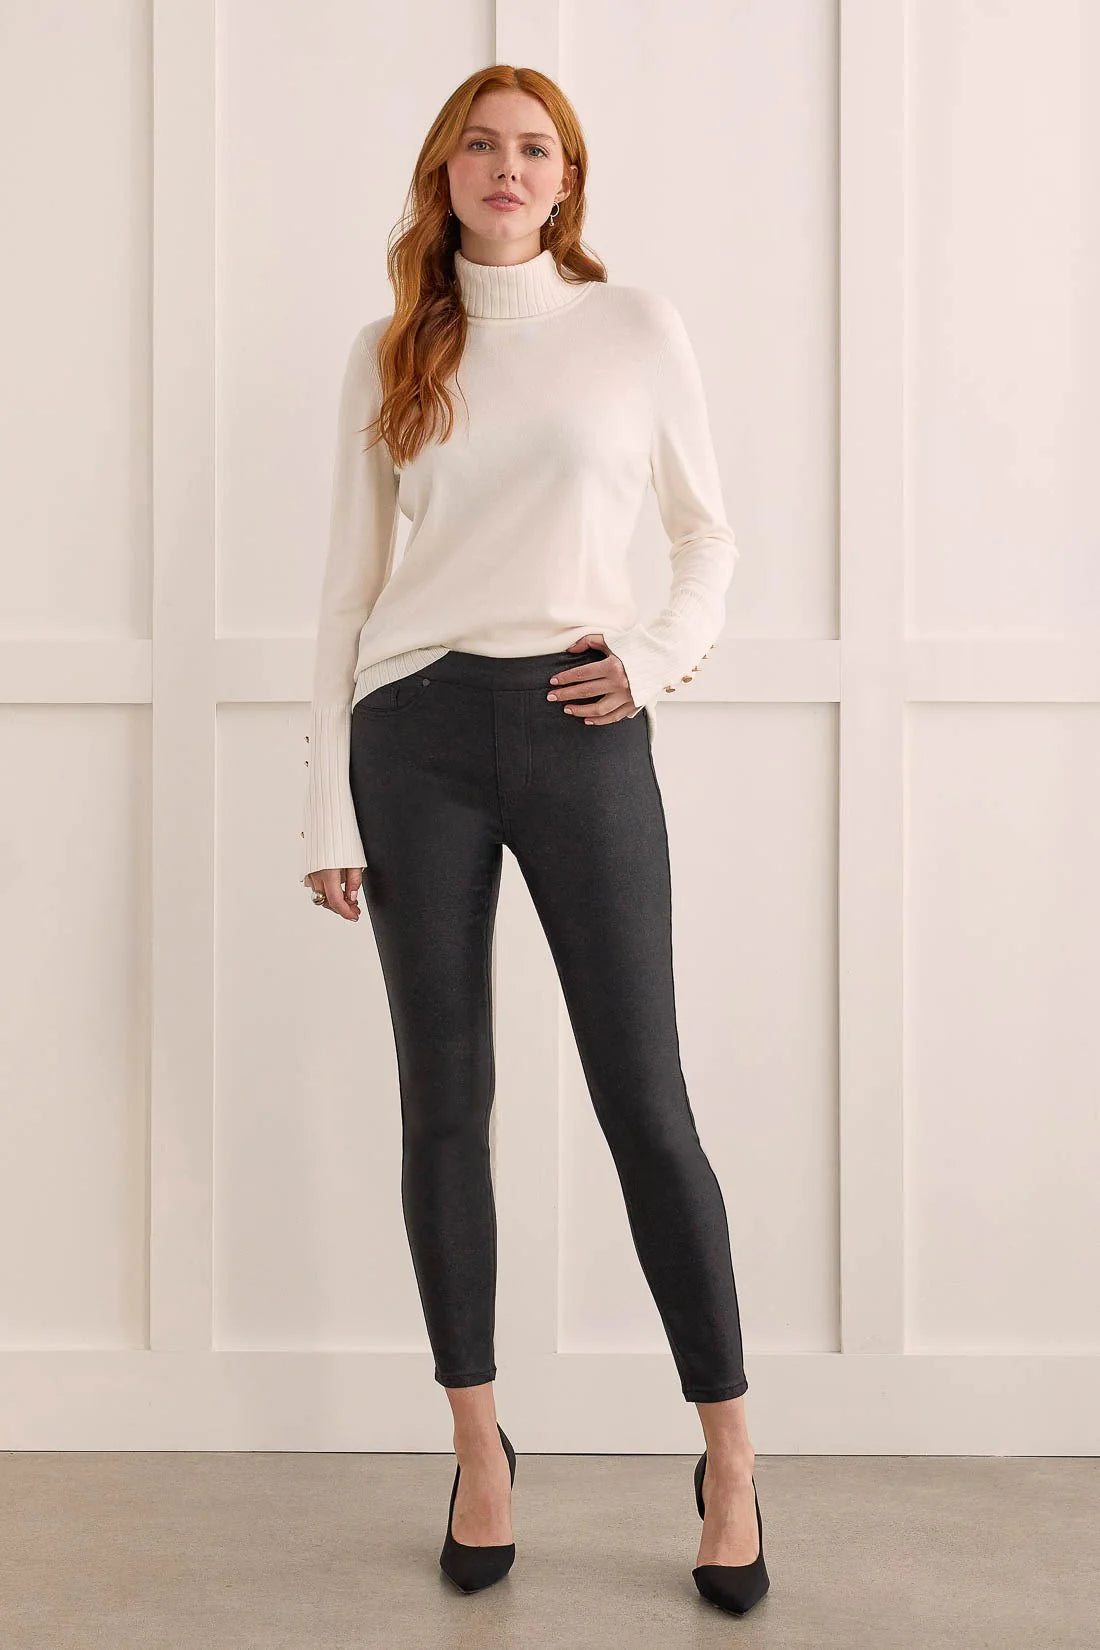 We're obsessed with the way these glitter-coated skinny pants wrap you in flashy style—they're perfect for bringing a dressy, pulled-together feel to even the most casual outfits.